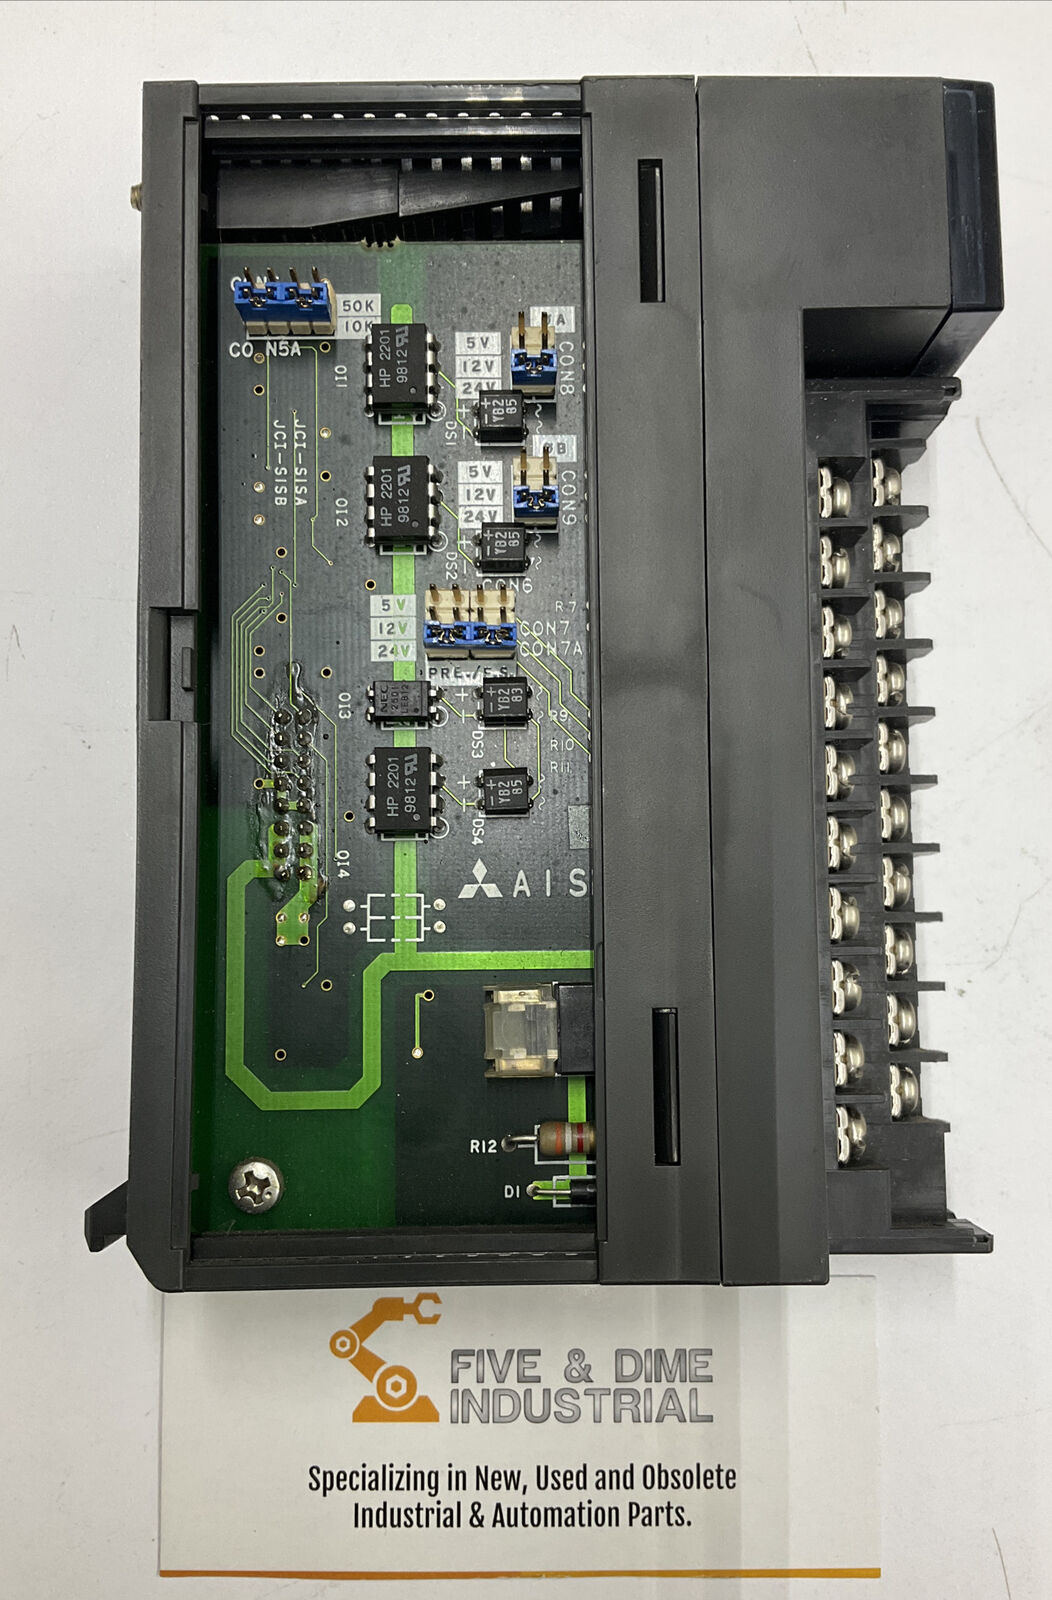 Mitsubishi A15D61 High Speed Counting Unit Module (YE193)